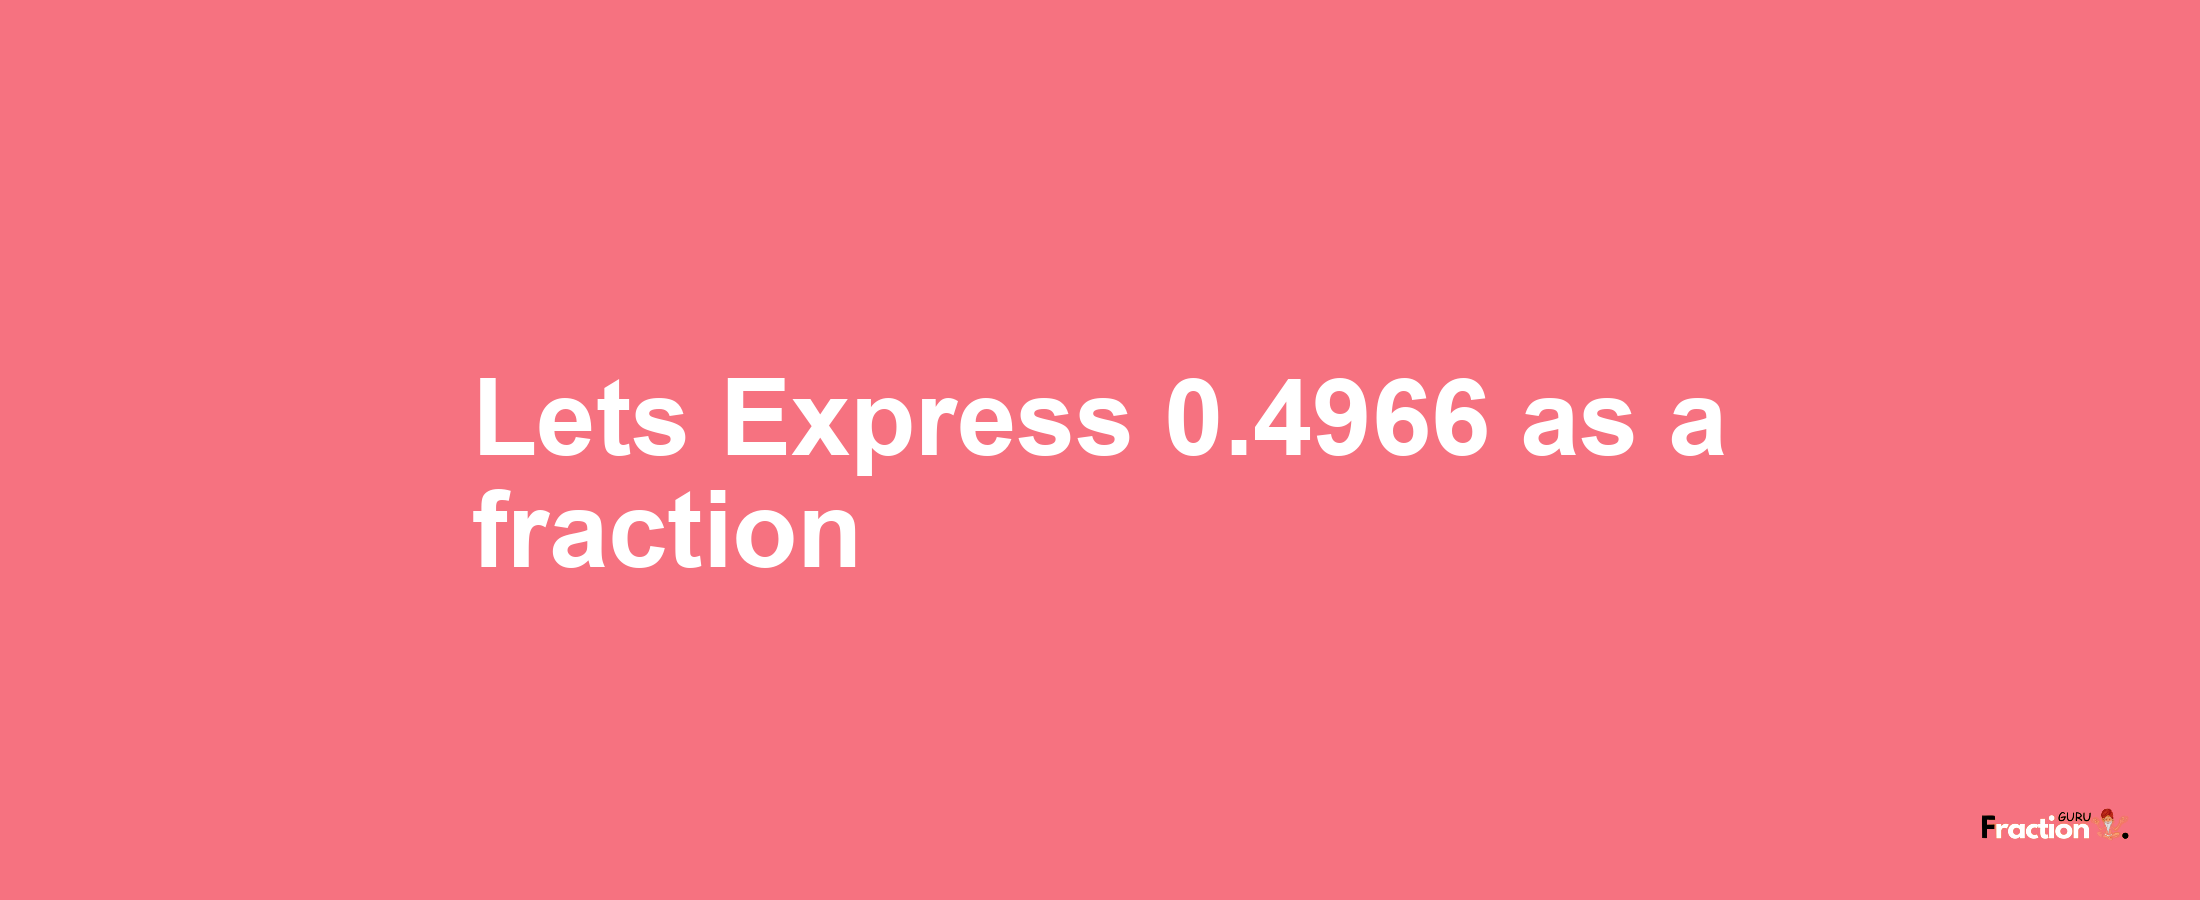 Lets Express 0.4966 as afraction